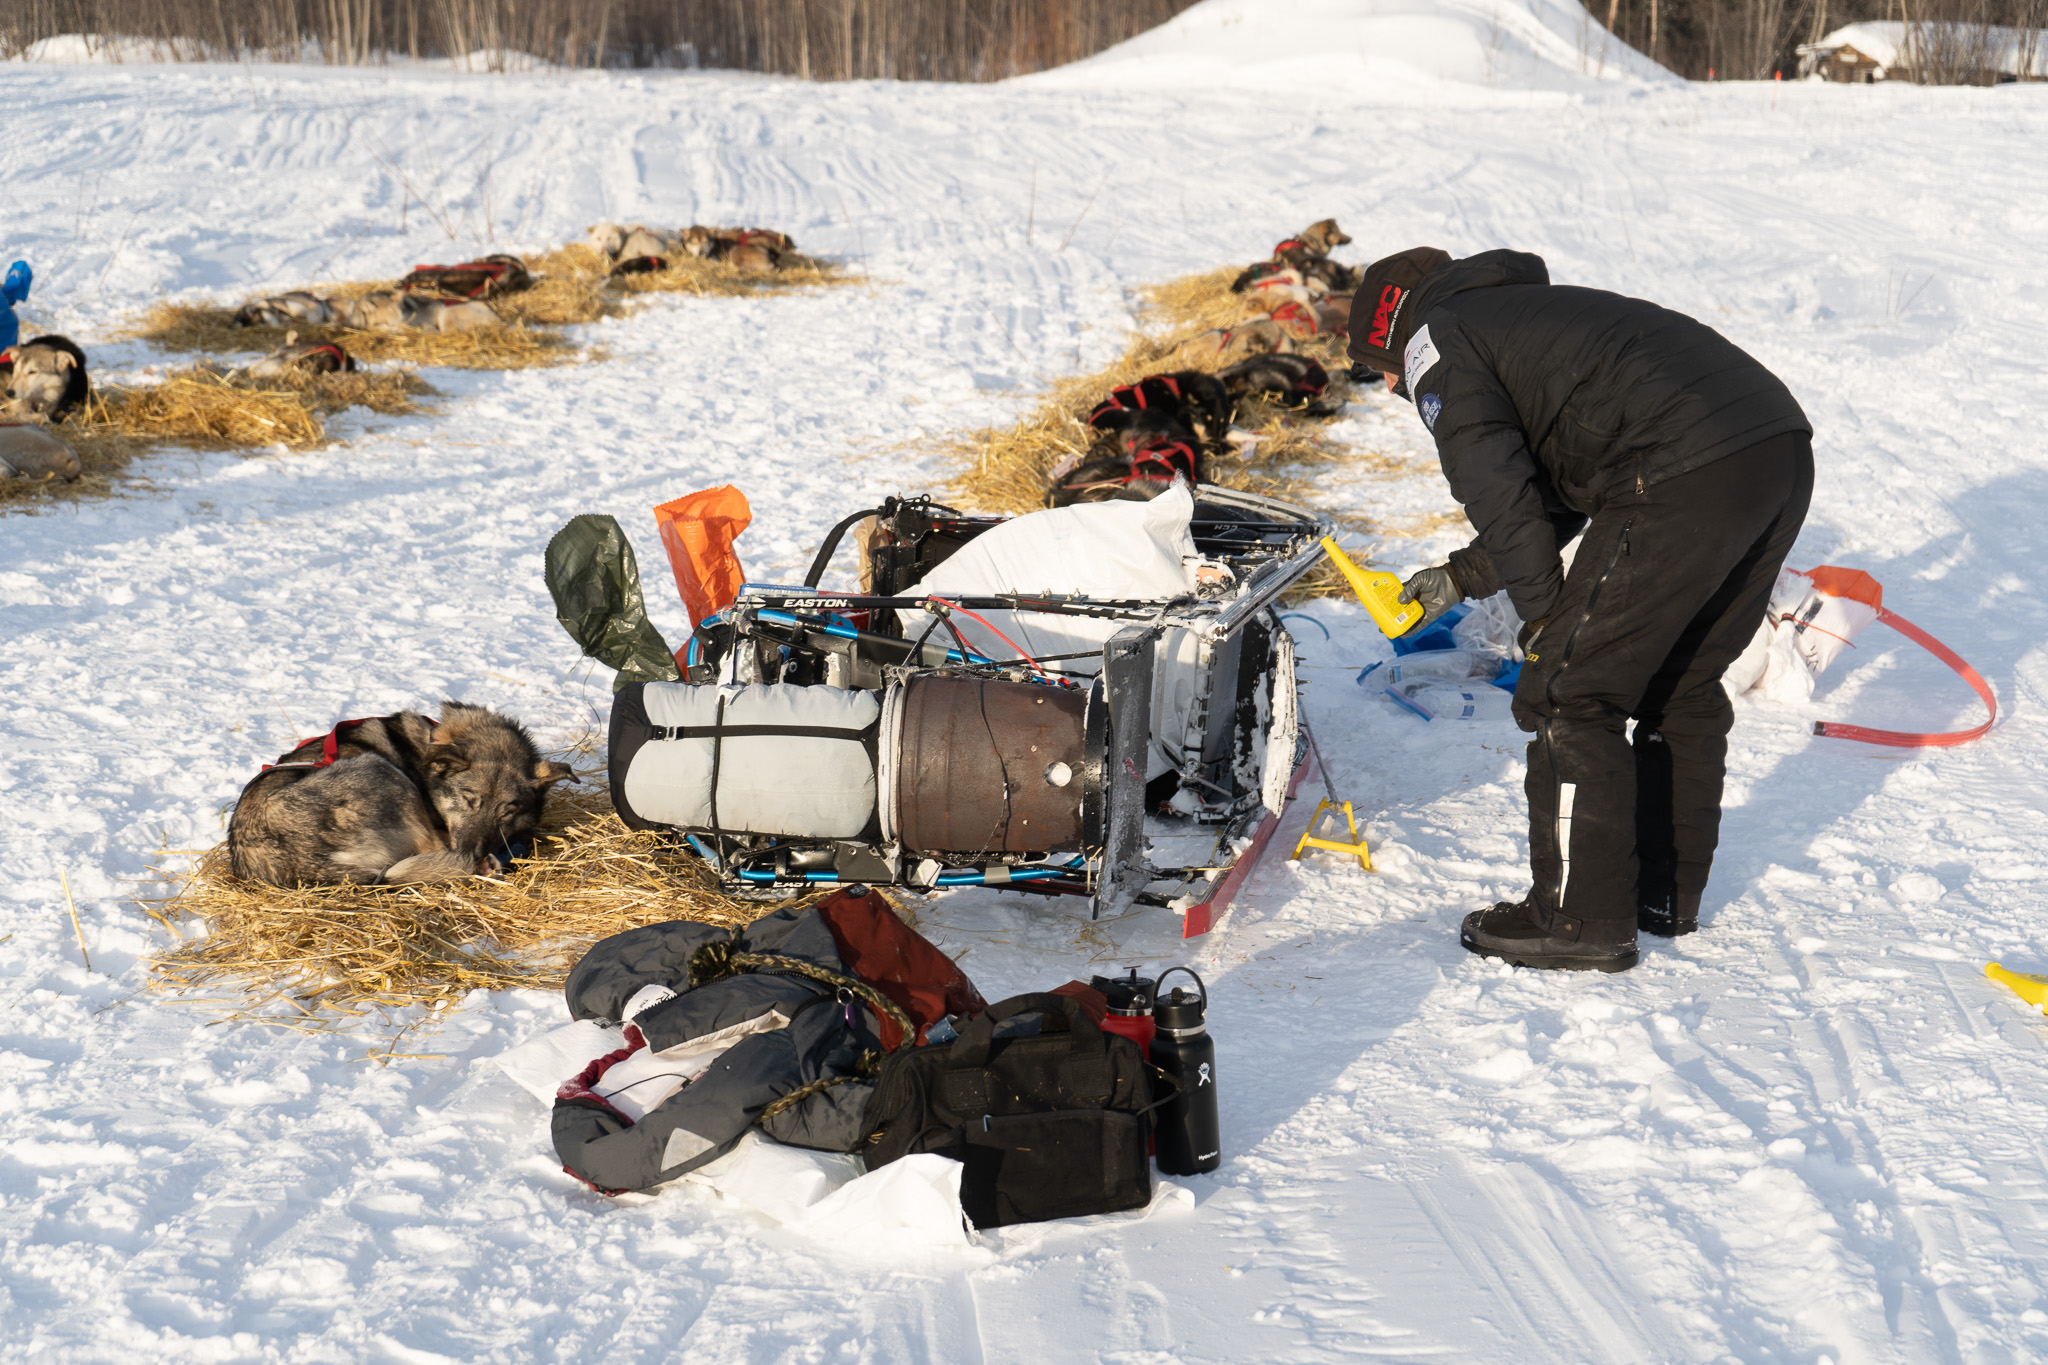 A person applies a yellow container to the runners of an upturned dog sled